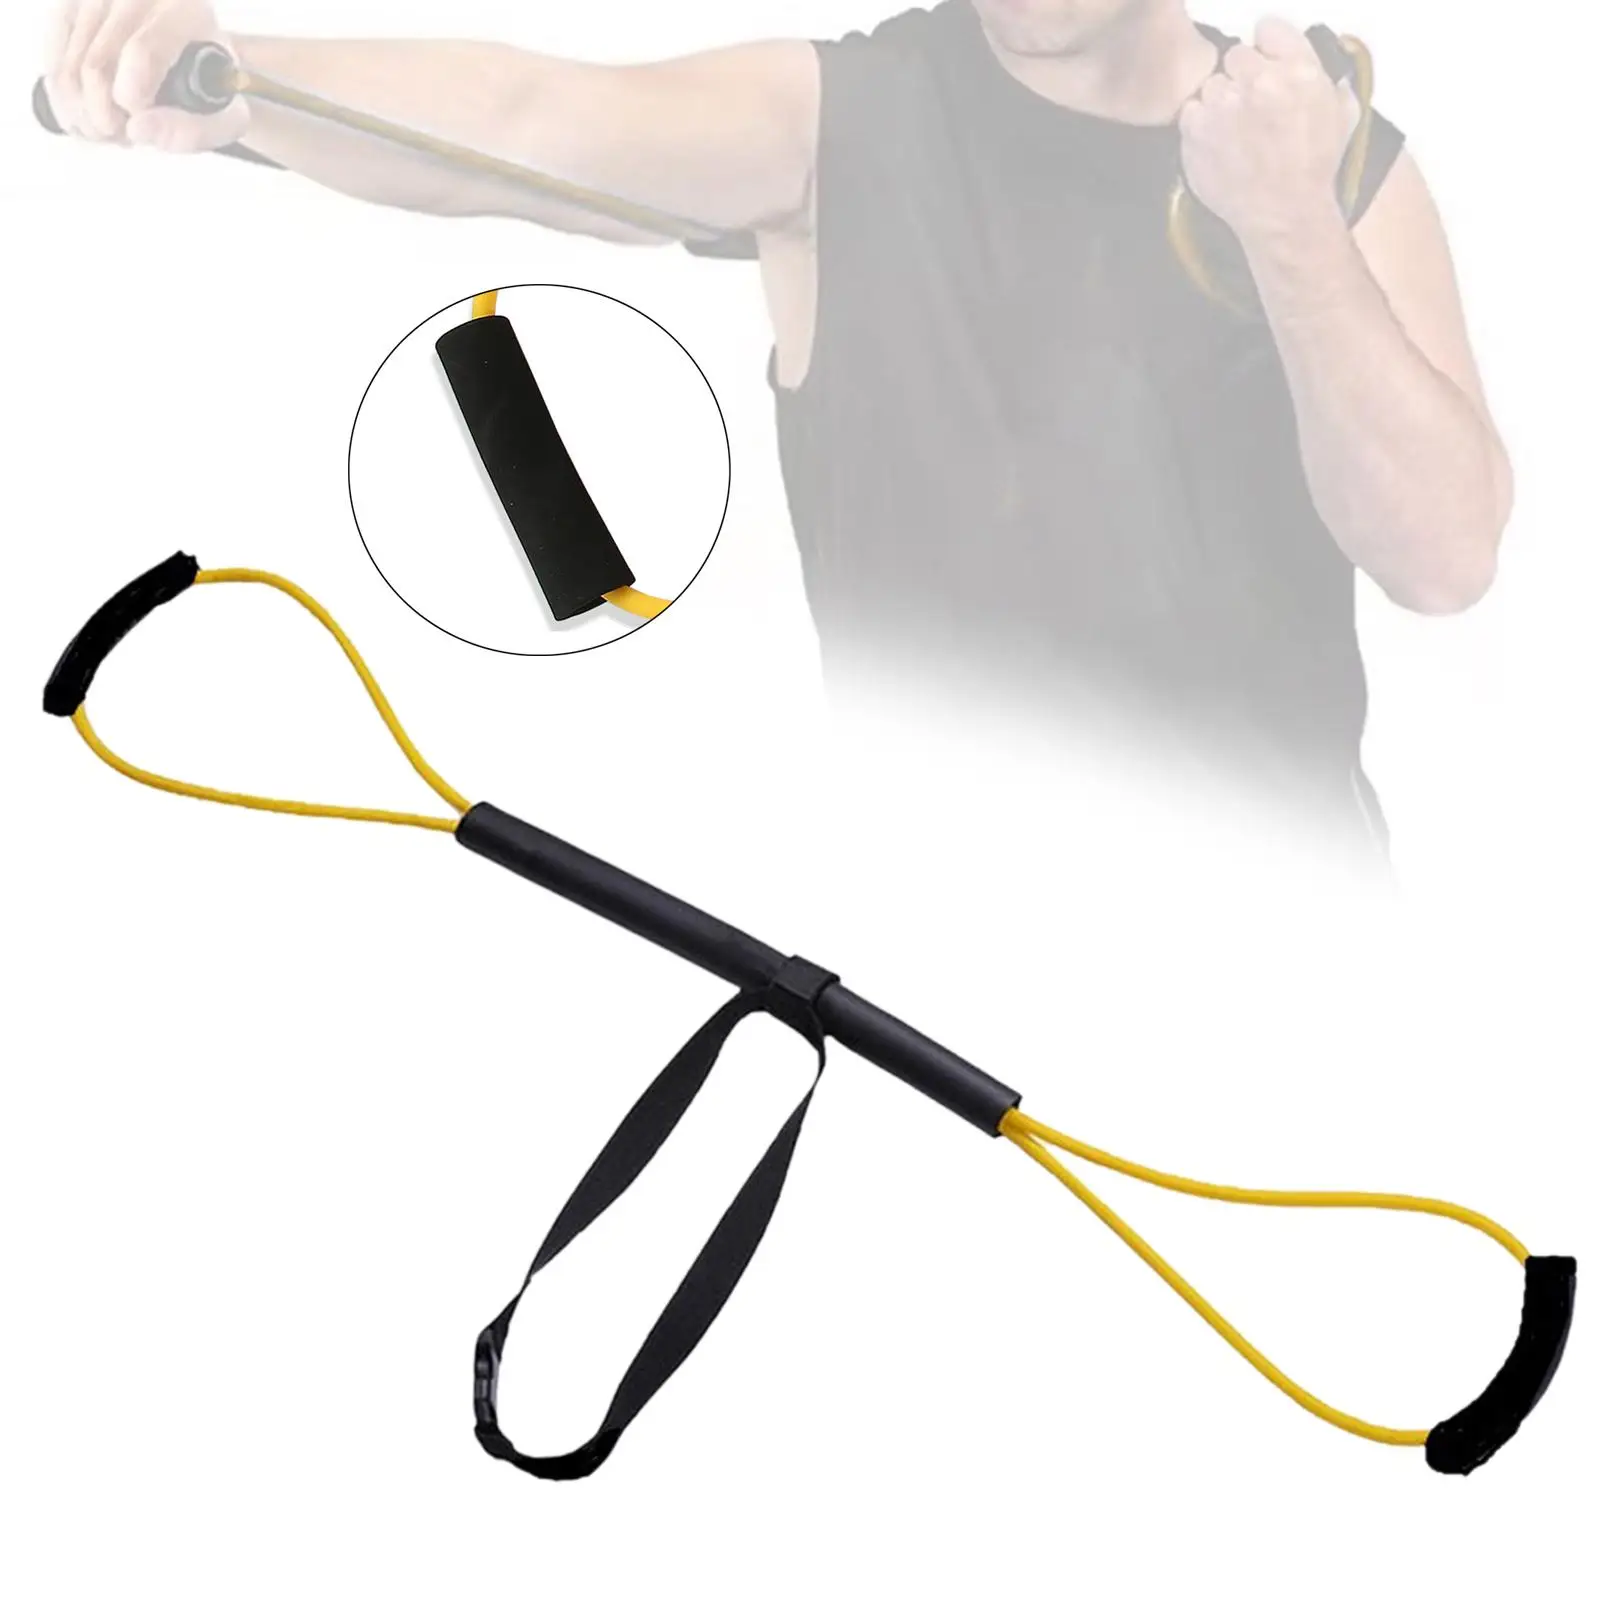 Boxing Bands Punching Equipment Lightweight Exercise Bands for Shadow Boxing